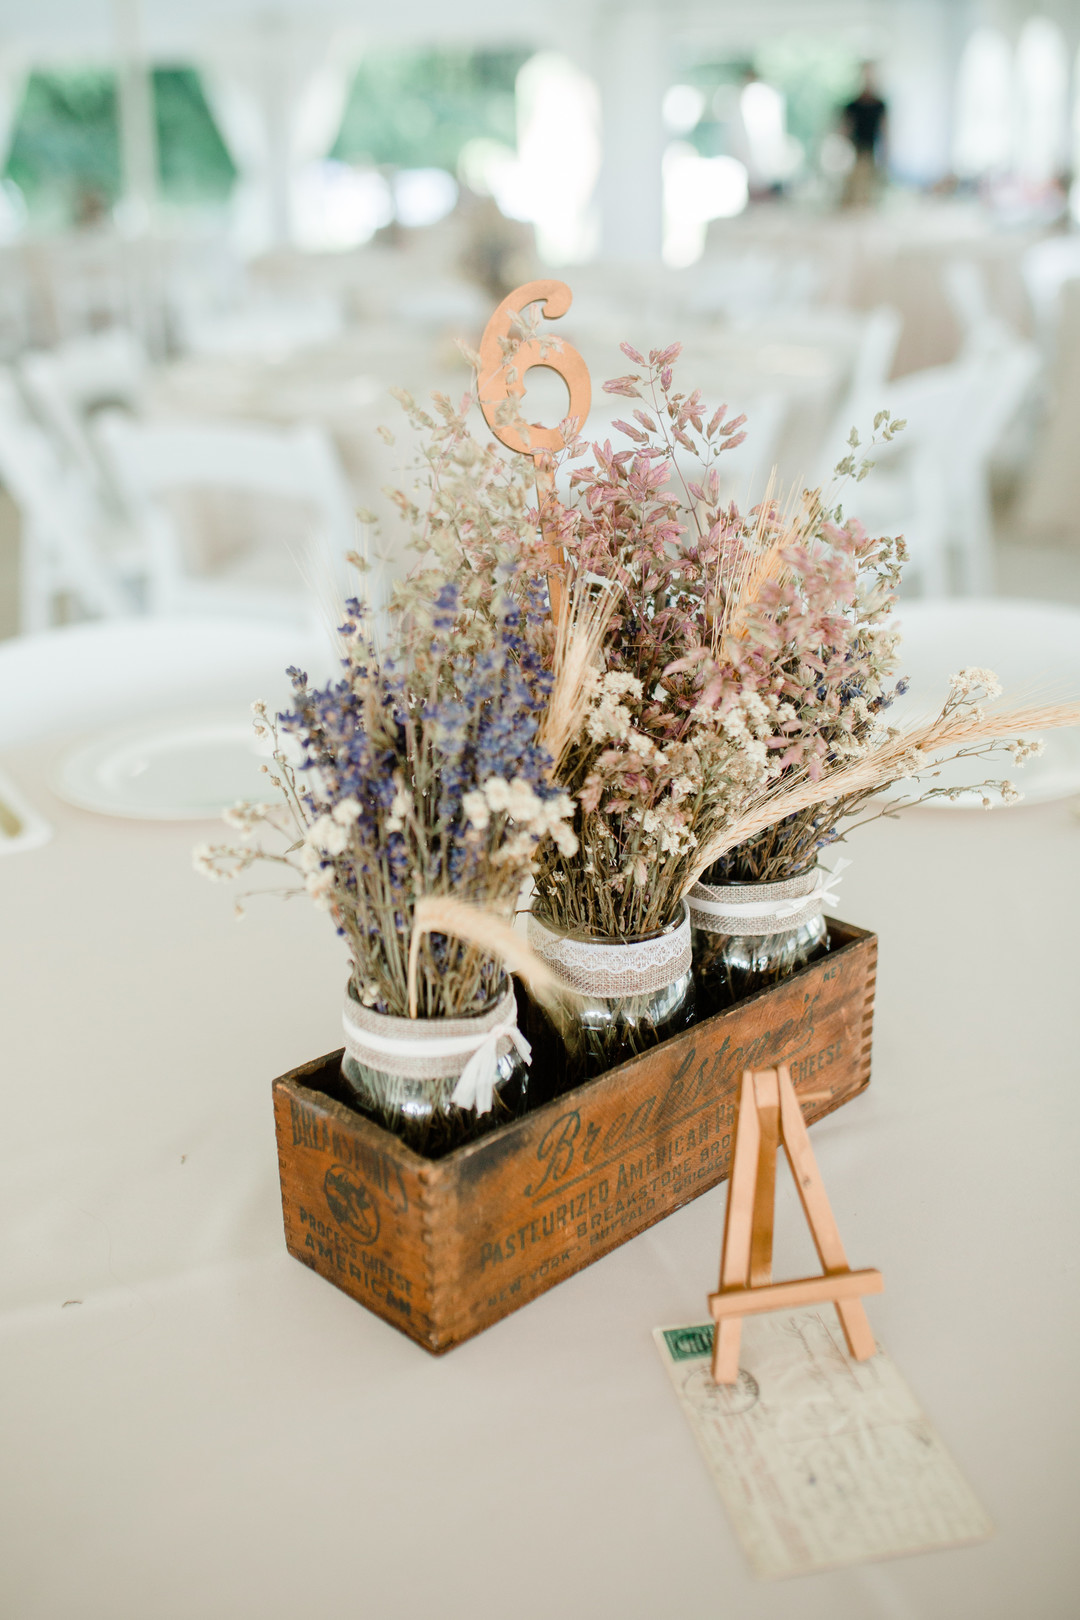 Rustic wedding centerpieces: Rustic country wedding in Minooka, IL captured by Katie Brsan Photography. Visit CHItheeWED.com for more wedding inspiration!